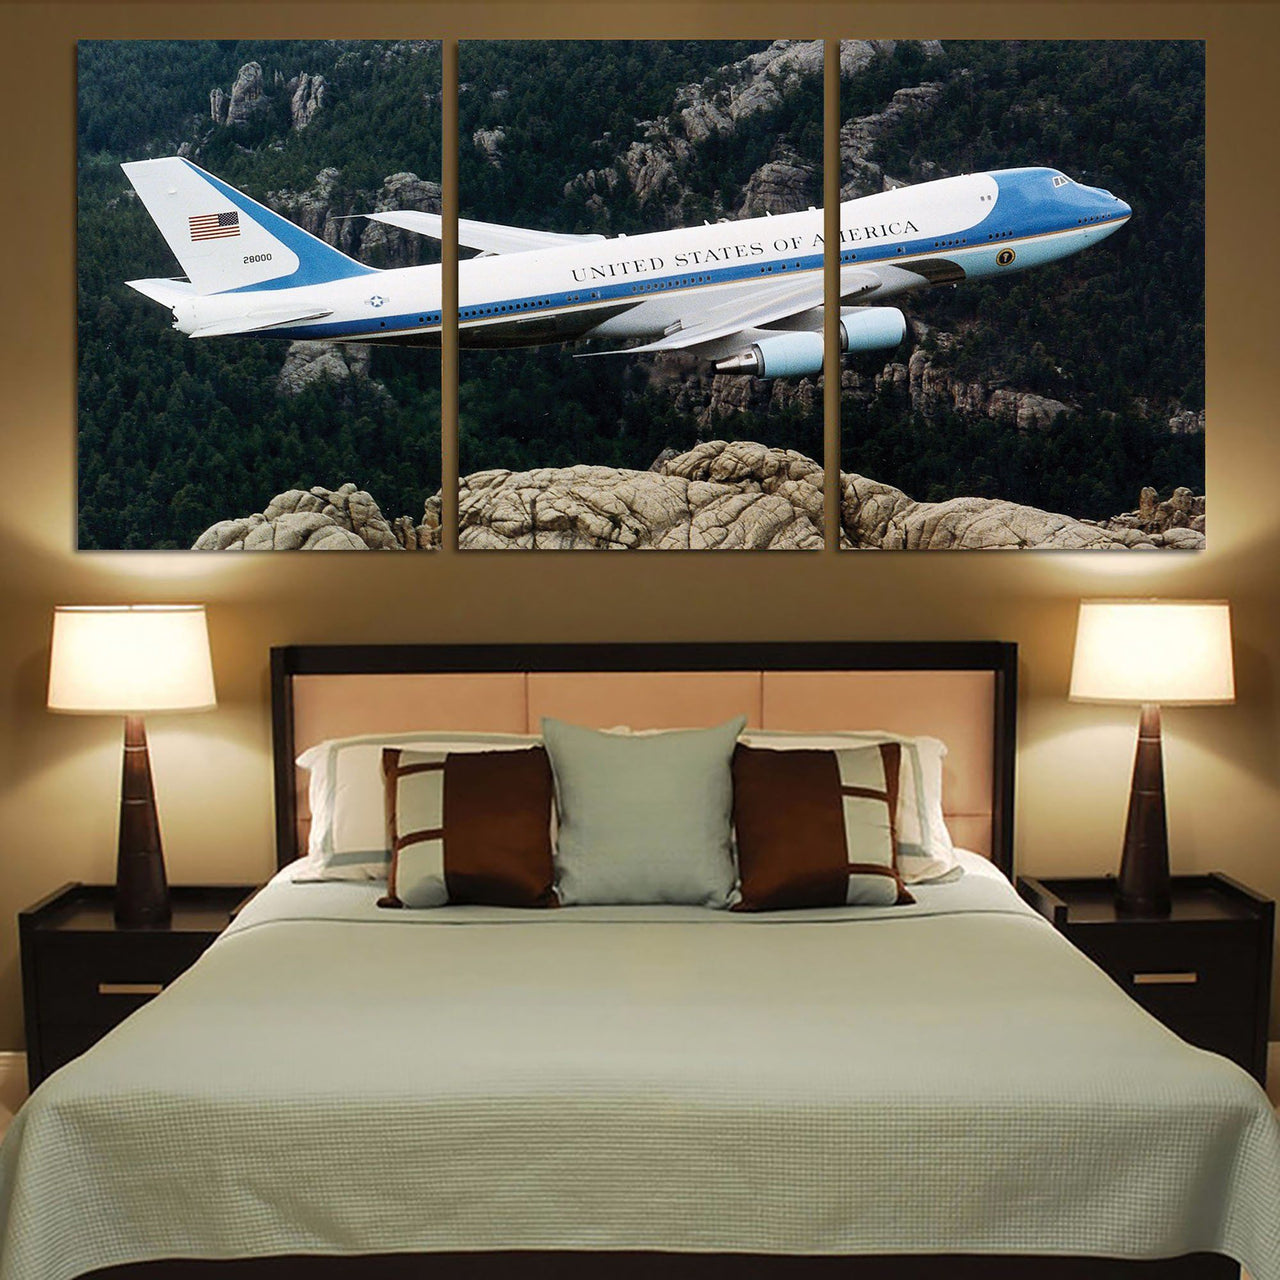 Cruising United States of America Boeing 747 Printed Canvas Posters (3 Pieces) Aviation Shop 